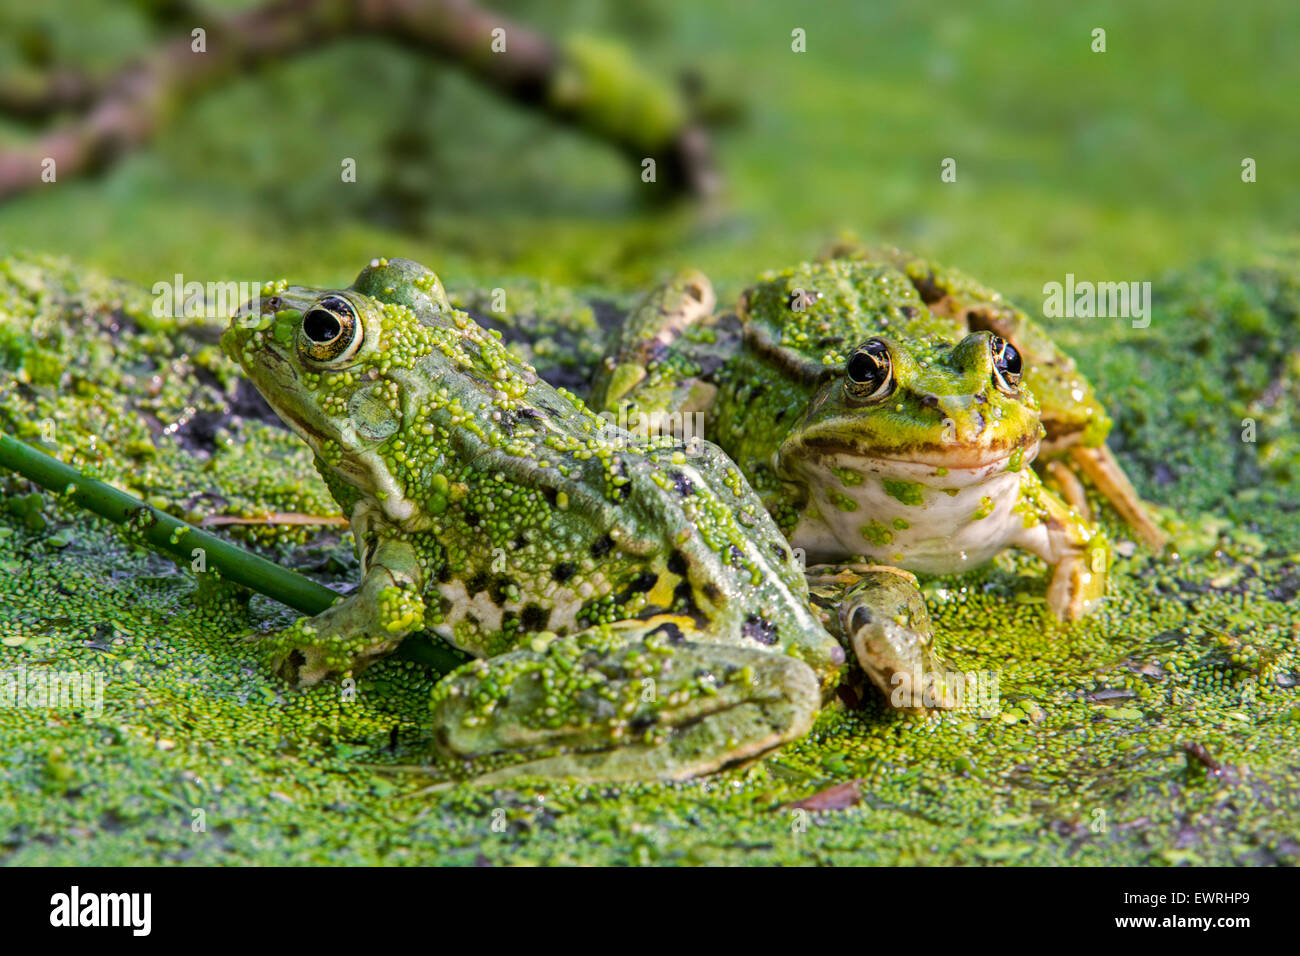 Two edible frogs / common water frog / green frog (Pelophylax kl. esculentus / Rana kl. esculenta) sitting among duckweed in pon Stock Photo